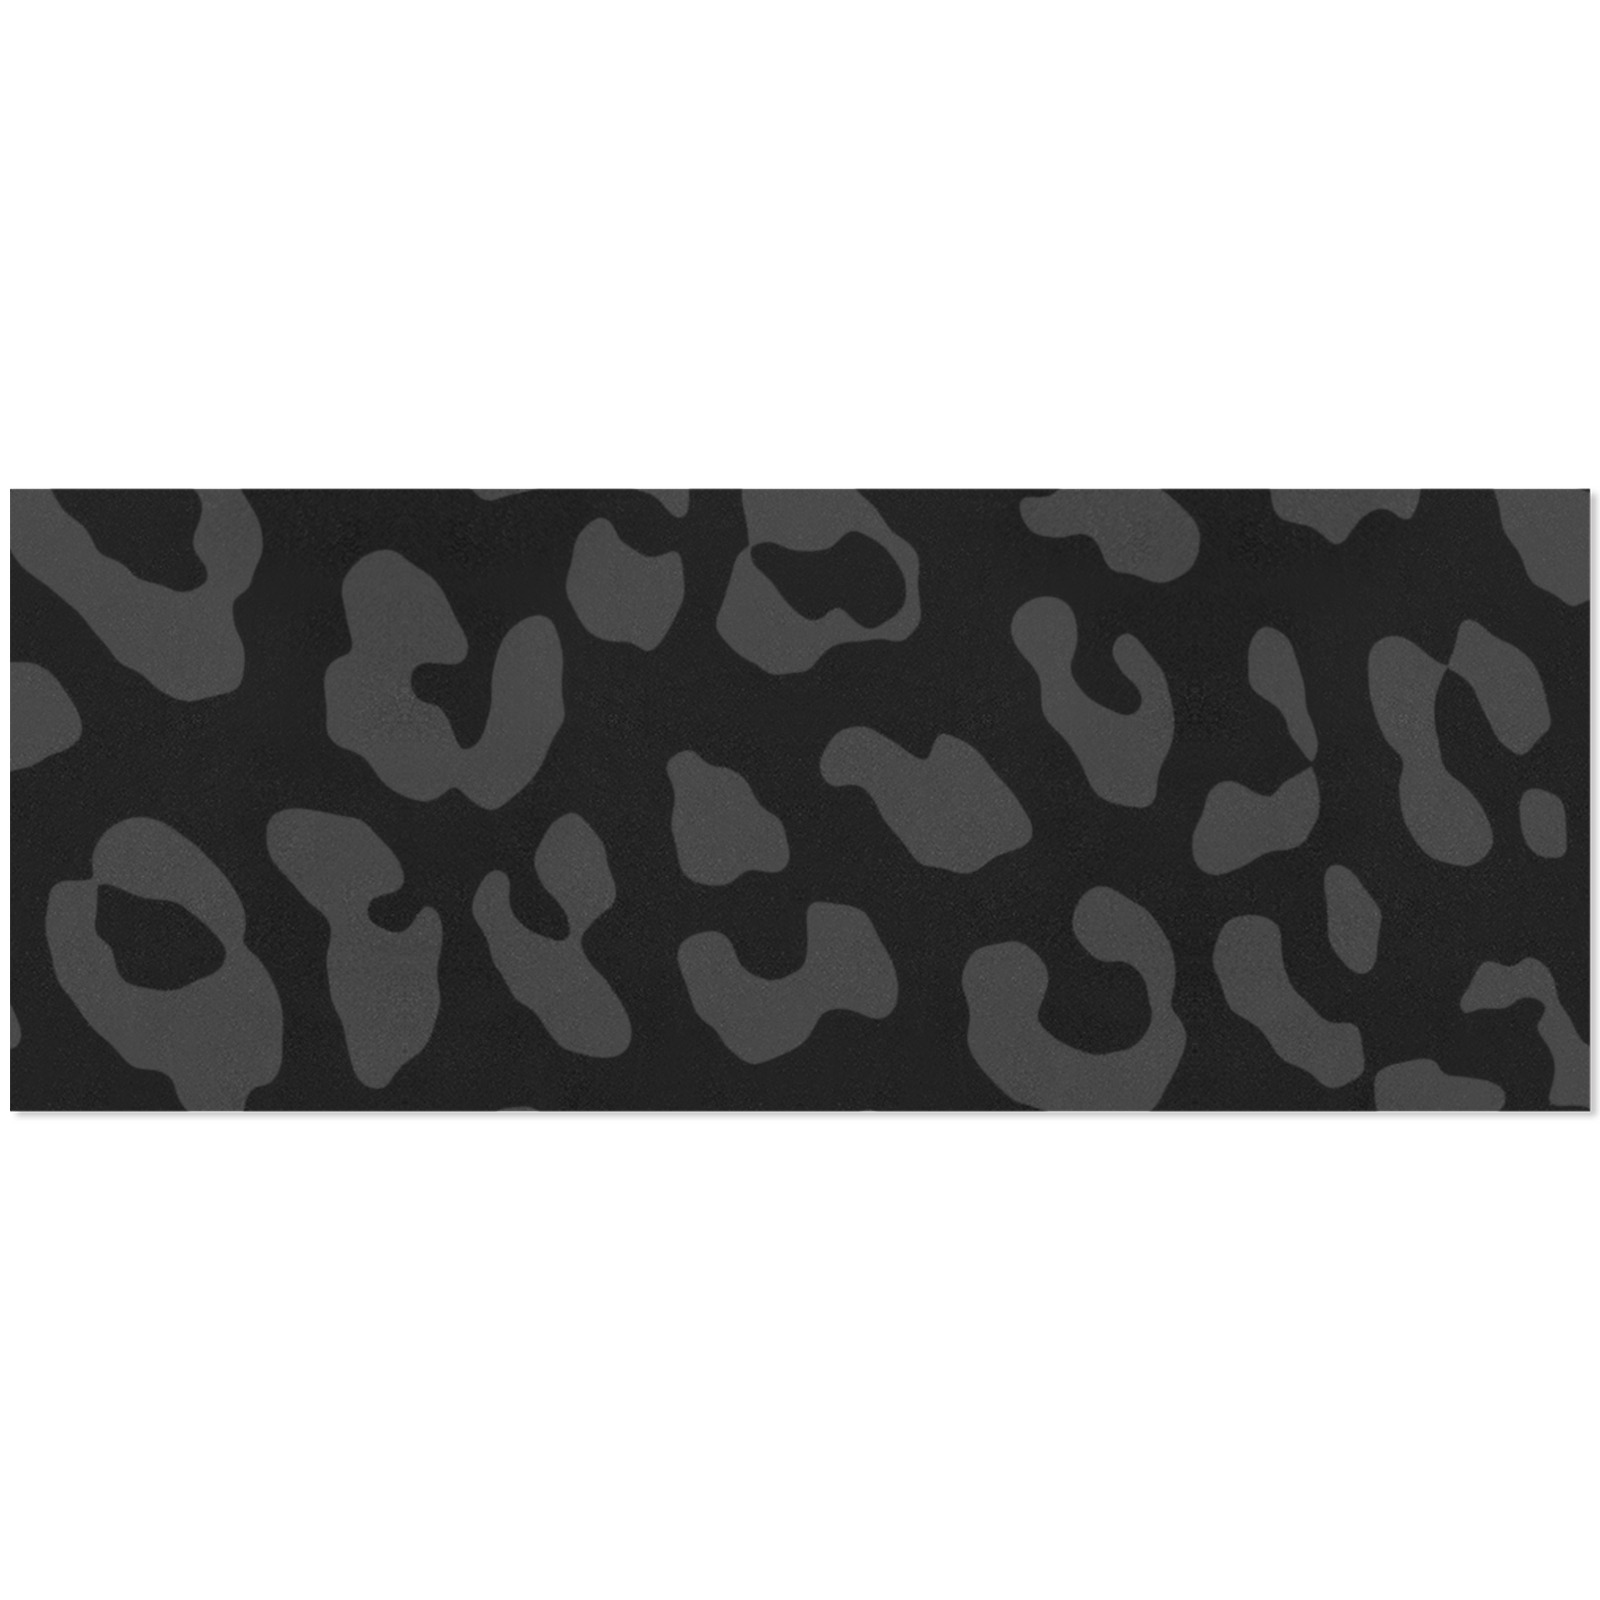 Leopard Print Black Gift Wrapping Paper 58"x 23" (1 Roll)